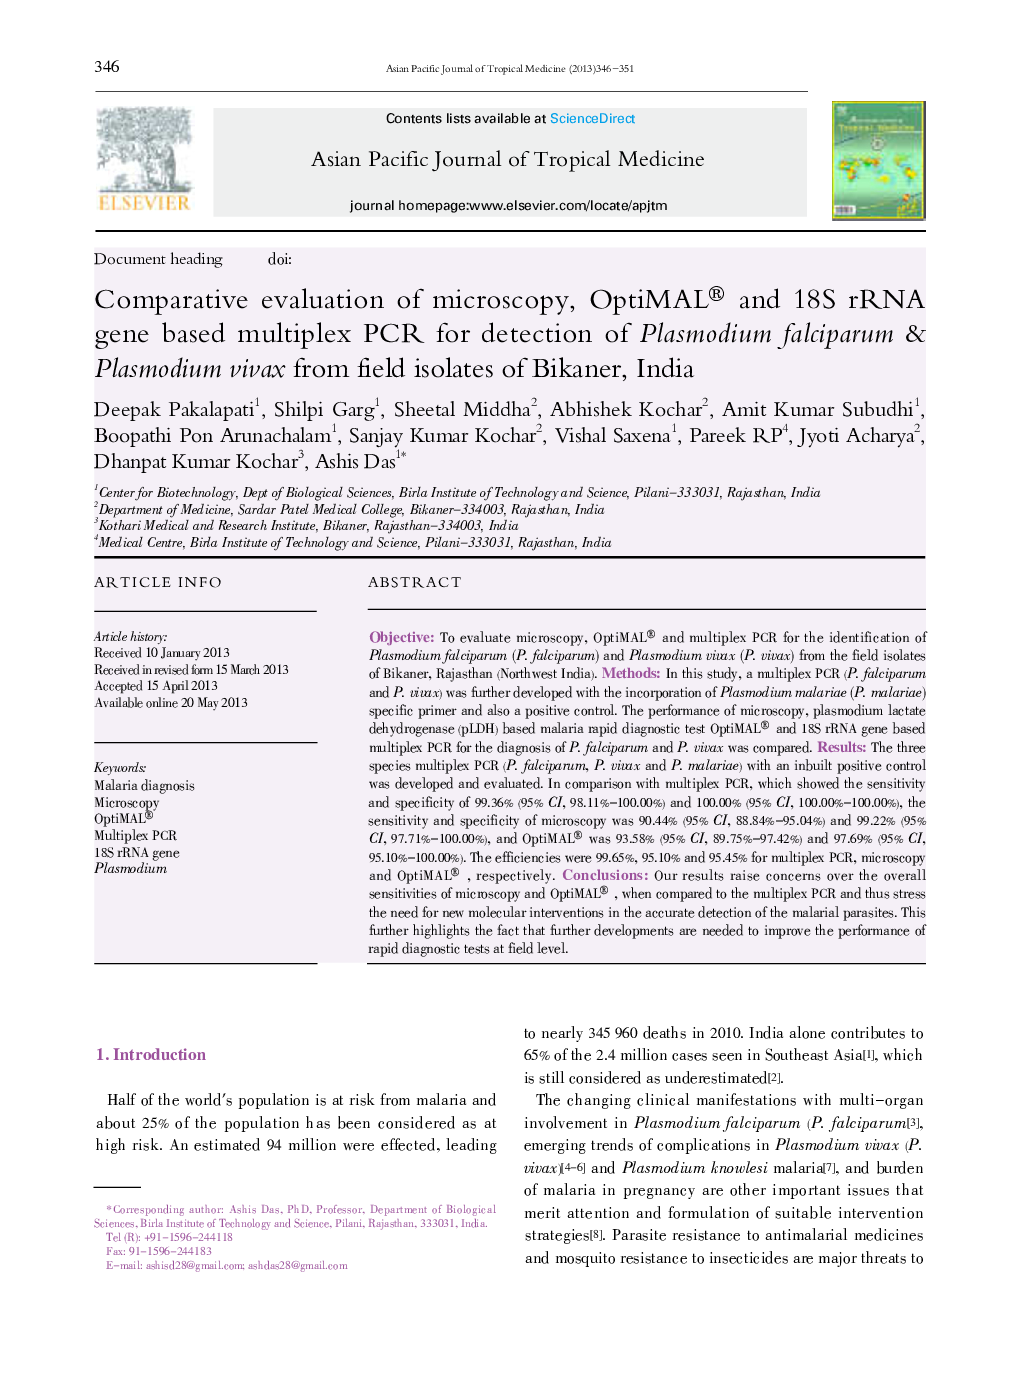 Comparative evaluation of microscopy, OptiMAL® and 18S rRNA gene based multiplex PCR for detection of Plasmodium falciparum & Plasmodium vivax from field isolates of Bikaner, India 